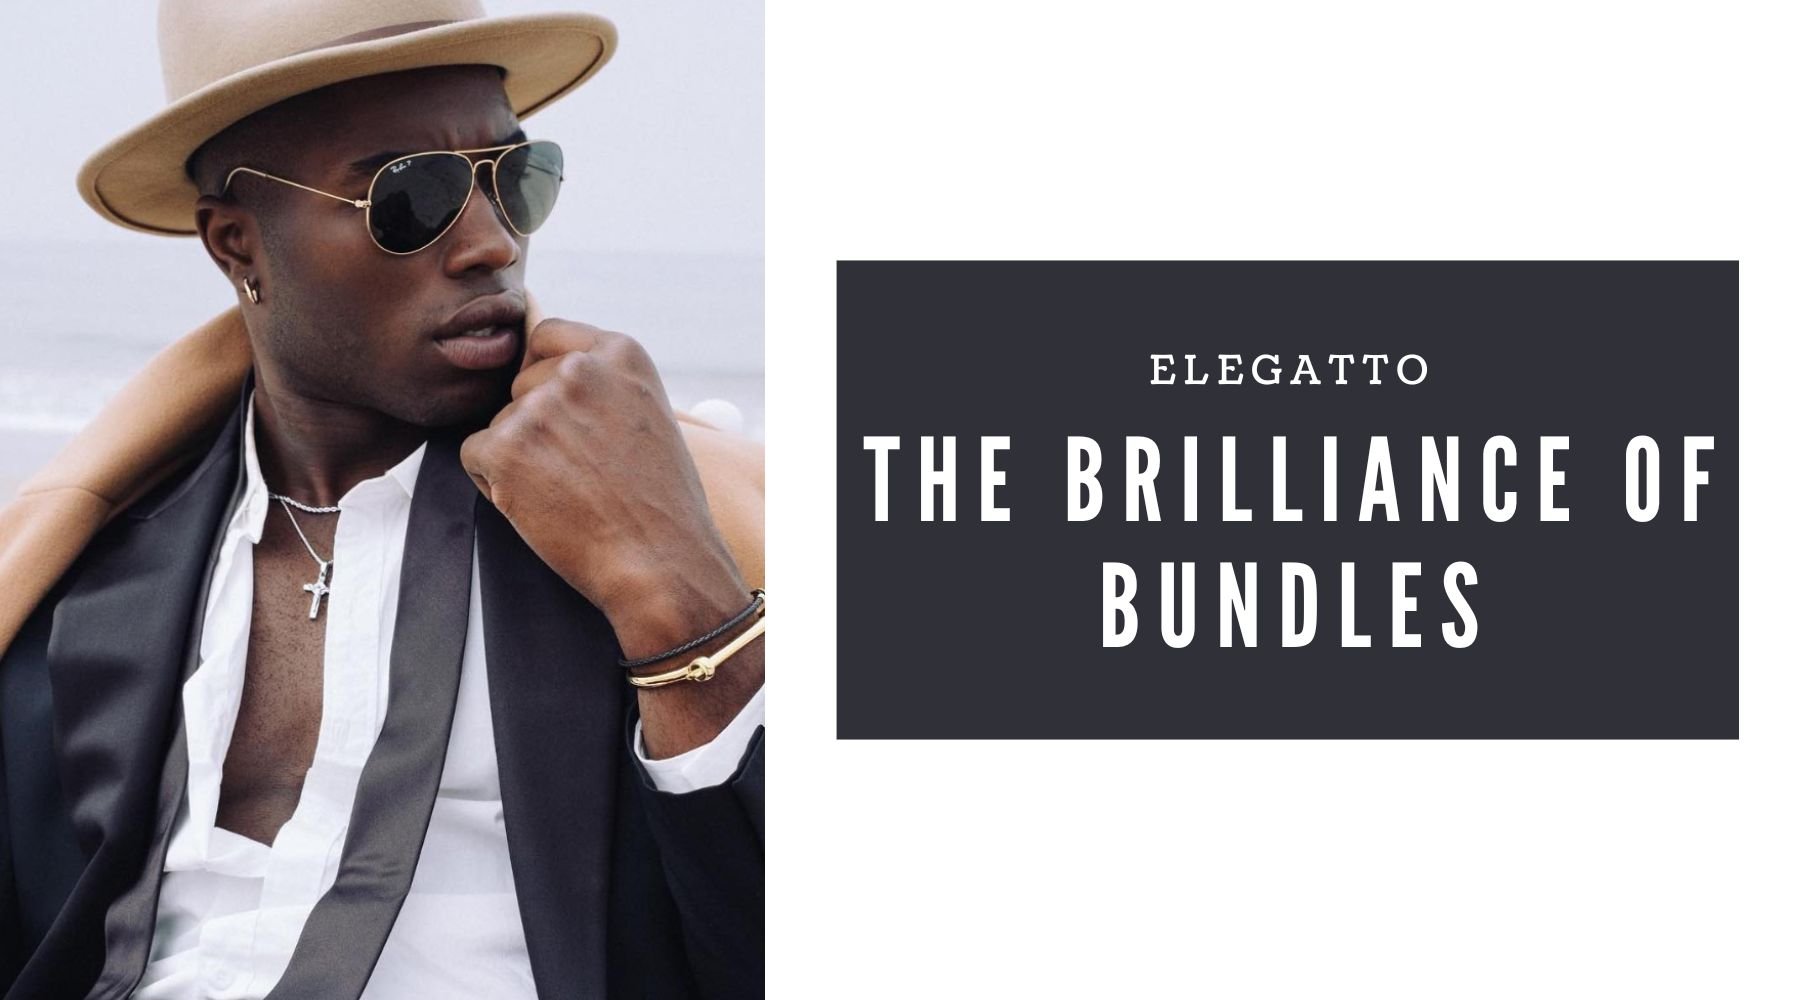 Enhance your style with a simple, yet elegant bundle - Elegatto